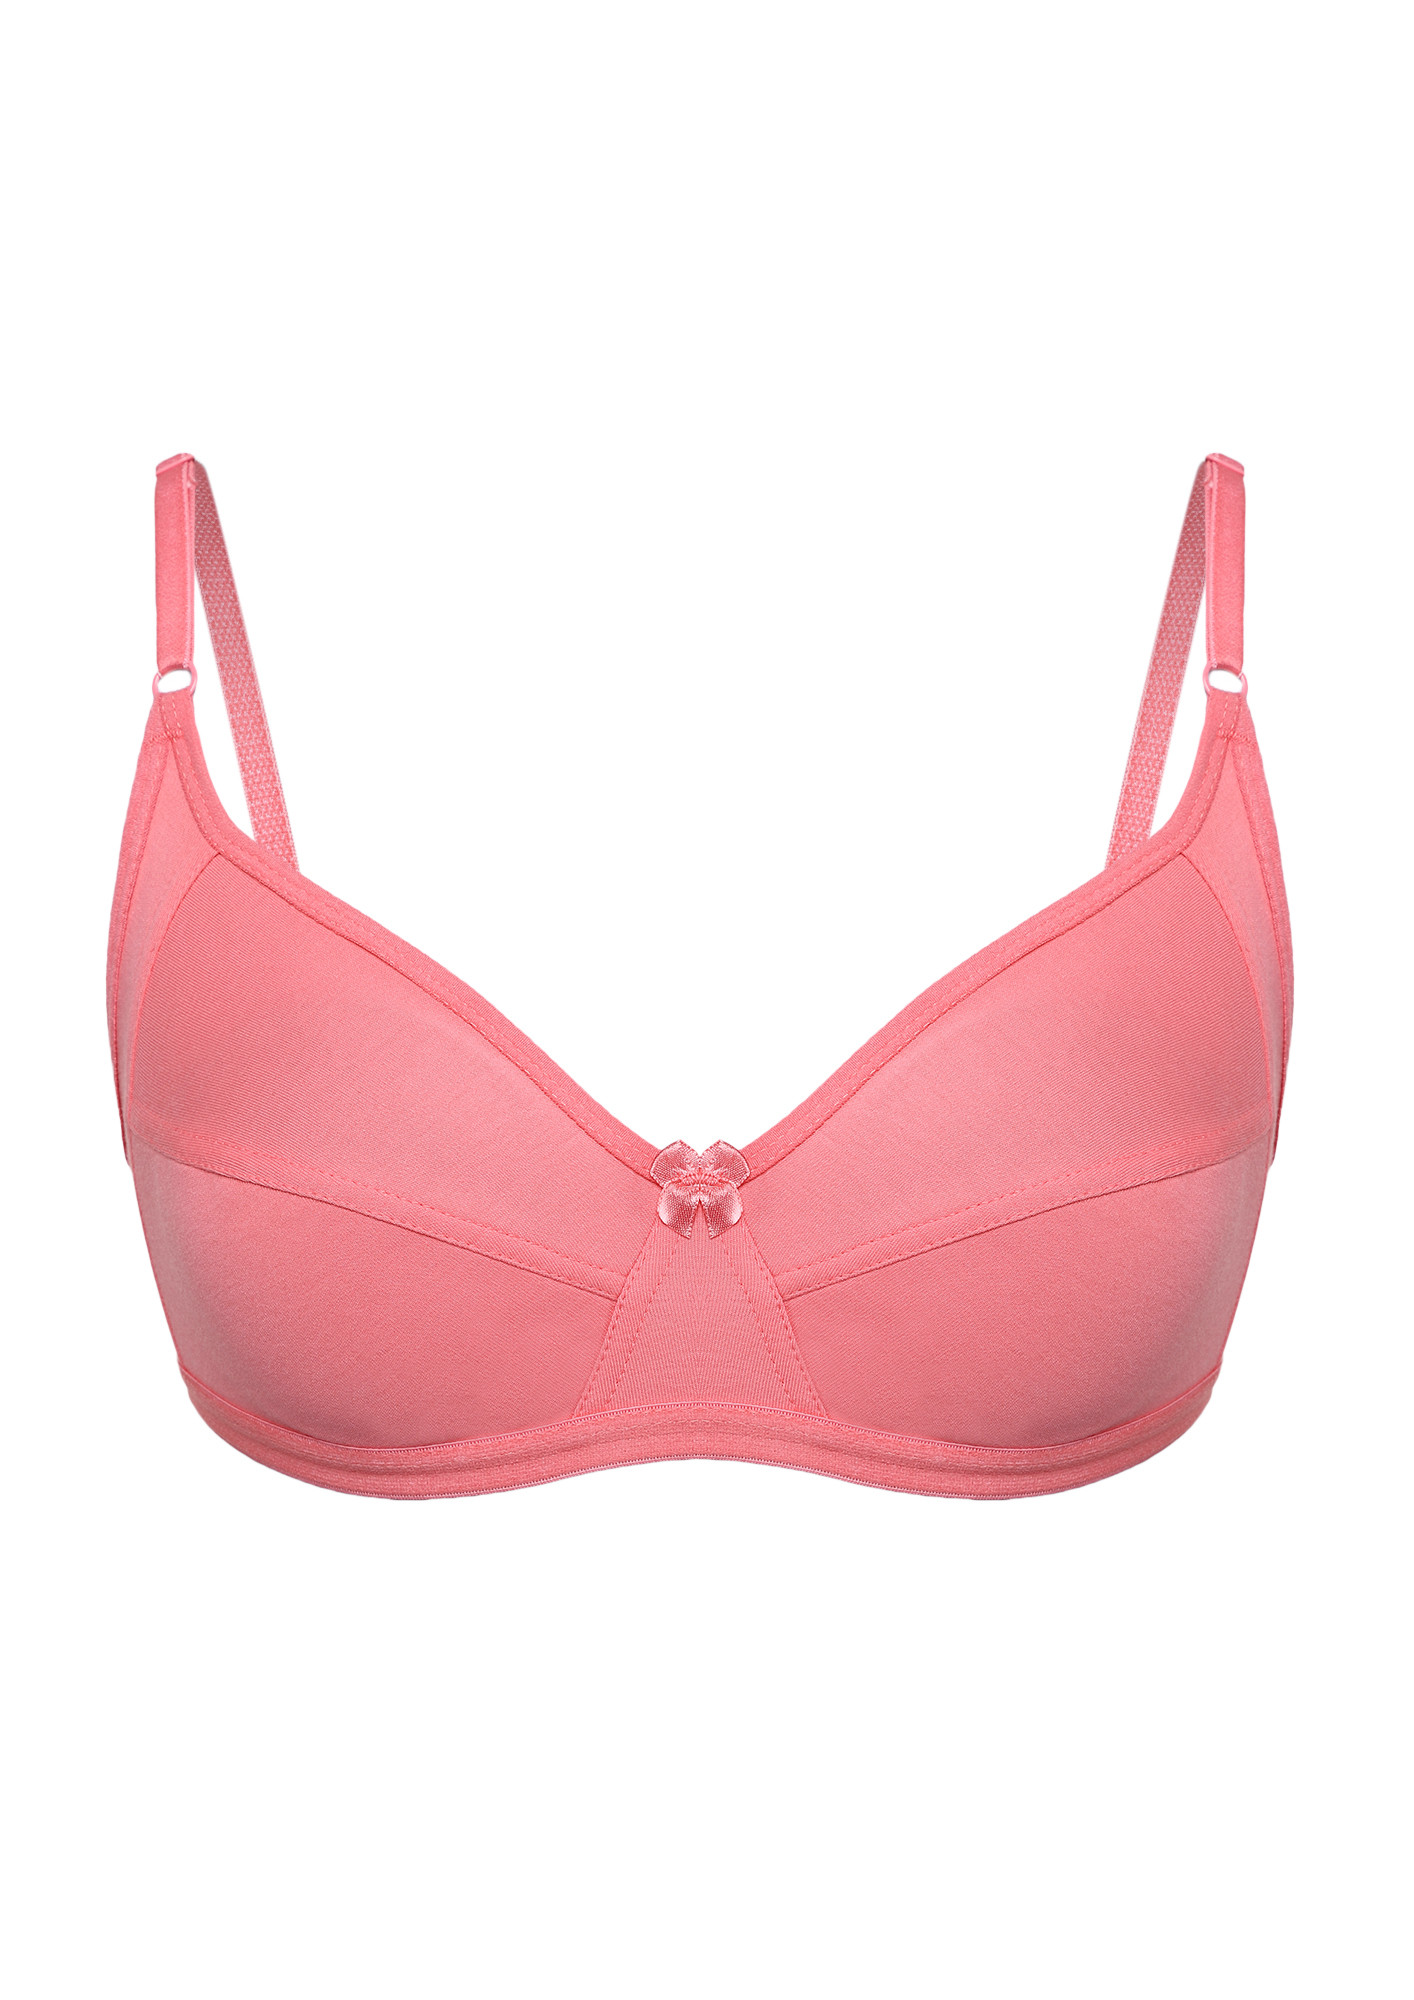 This bra is my favorite bra ever! Use code NINAXSPANX for 10% off!